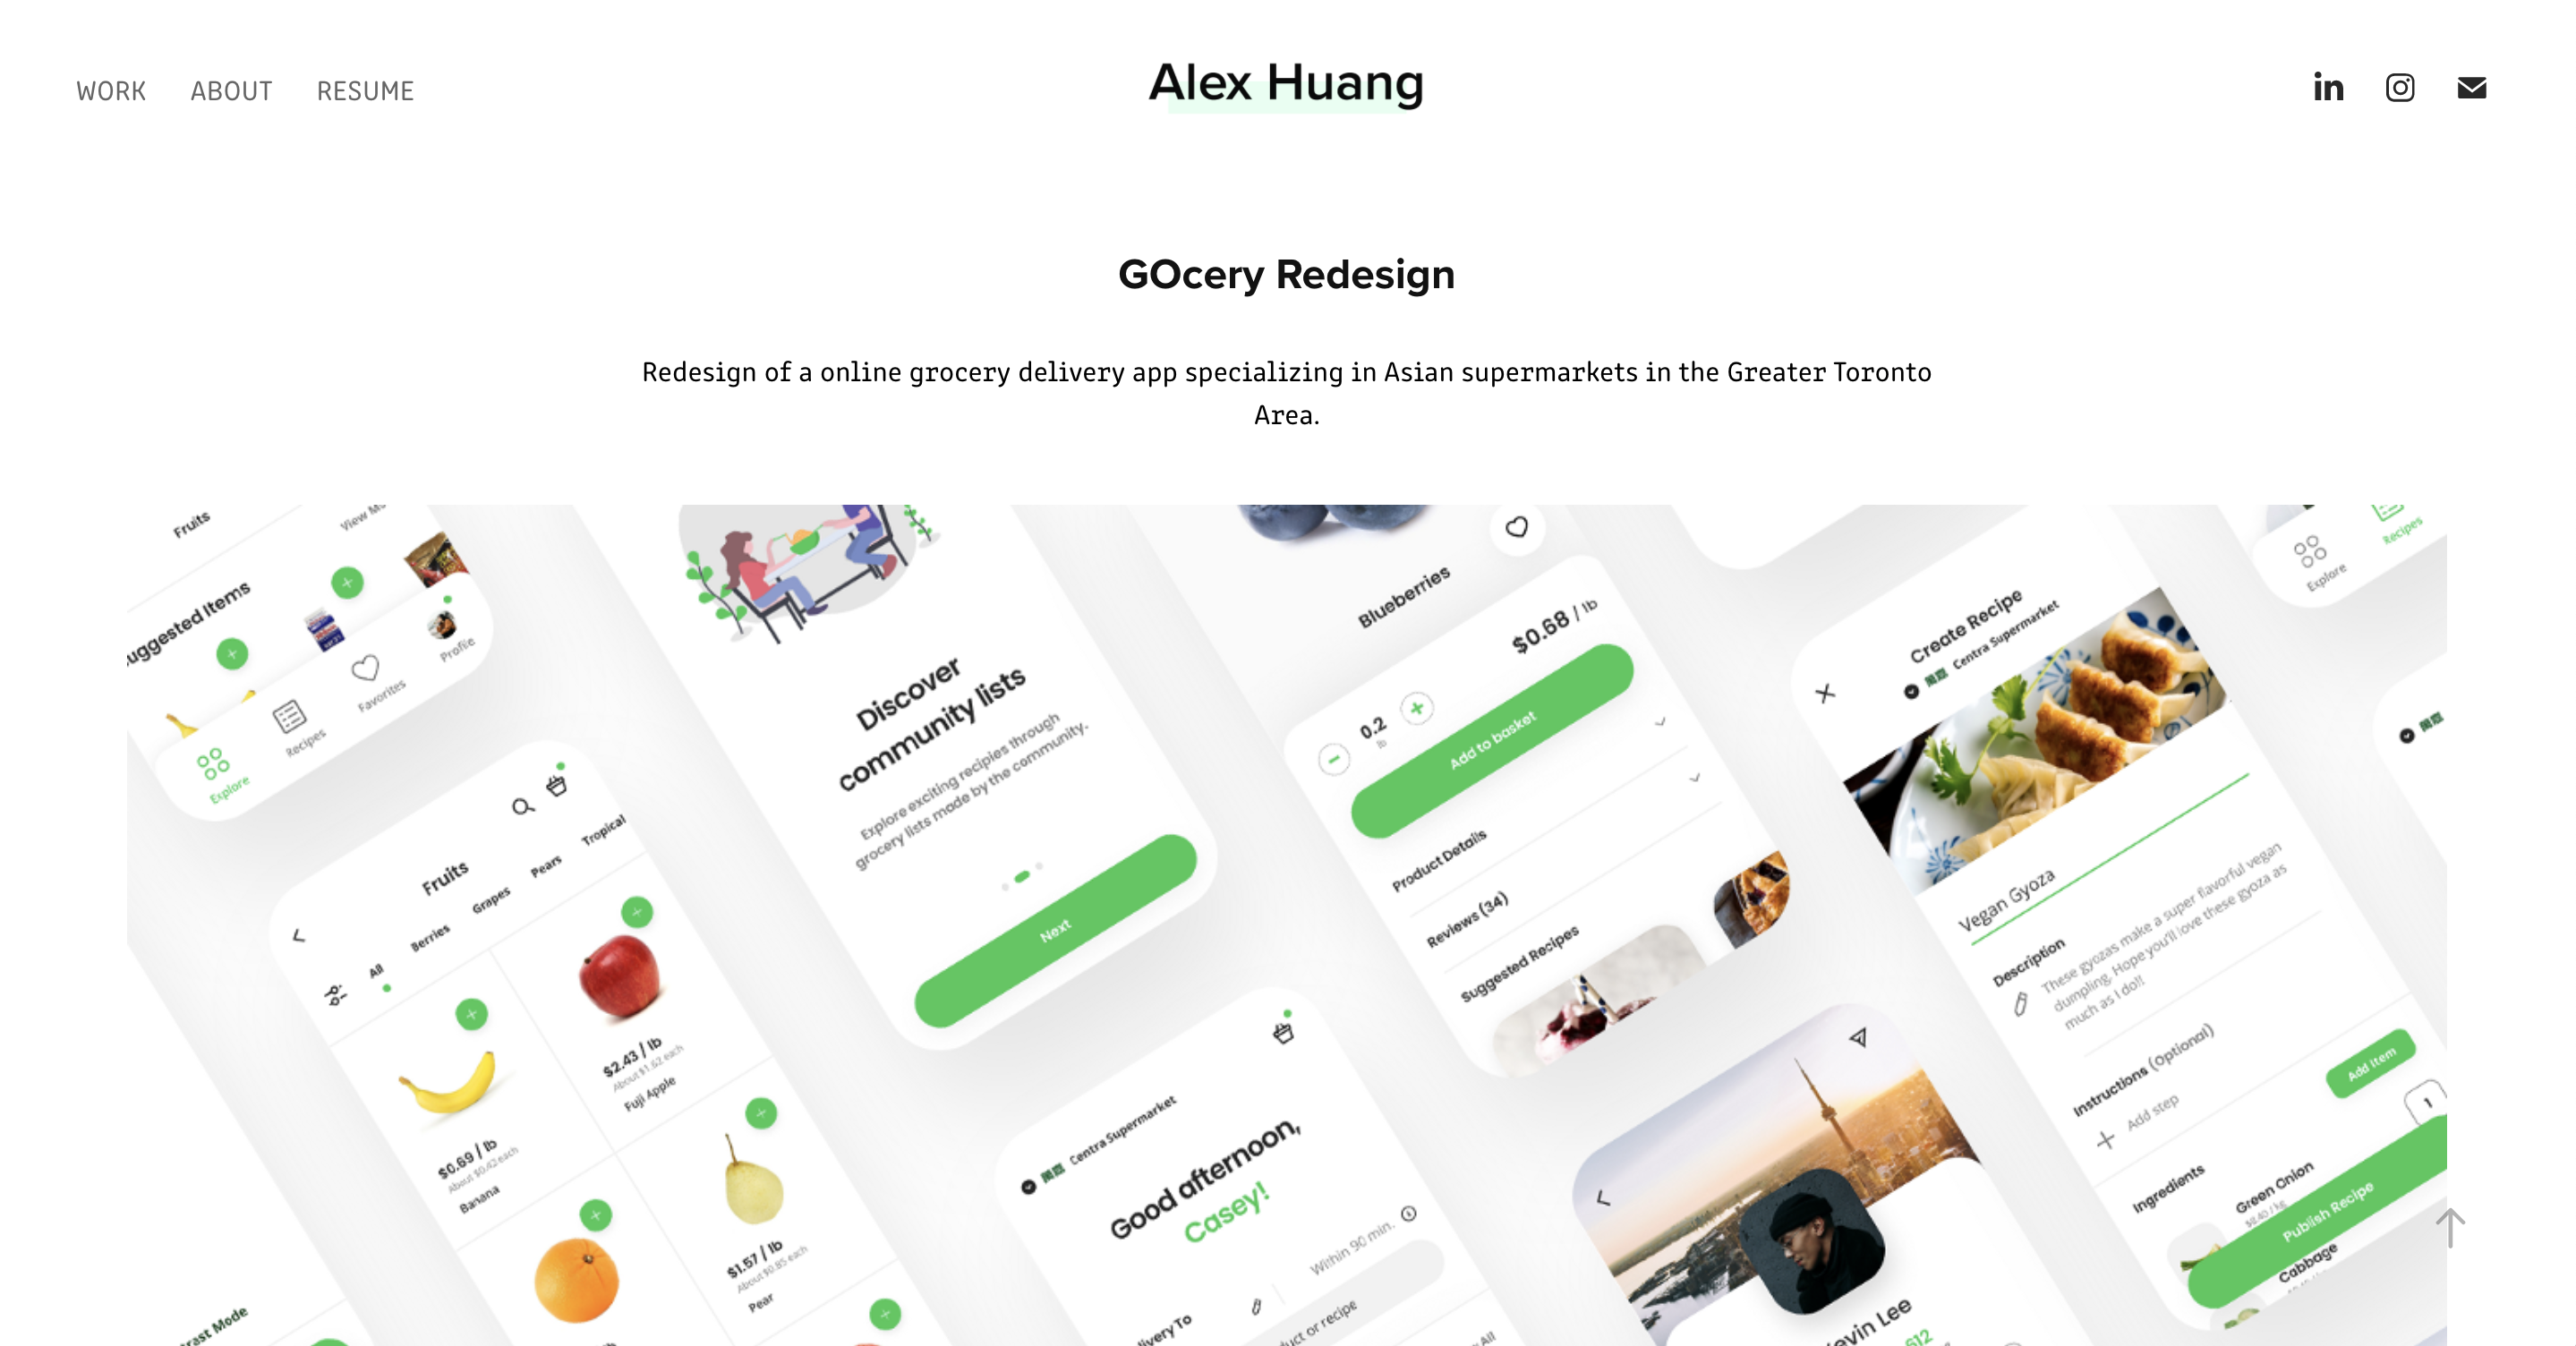 GOcery: Reinventing Grocery Delivery UX Design Project by Alex Huang | Juno College of Technology